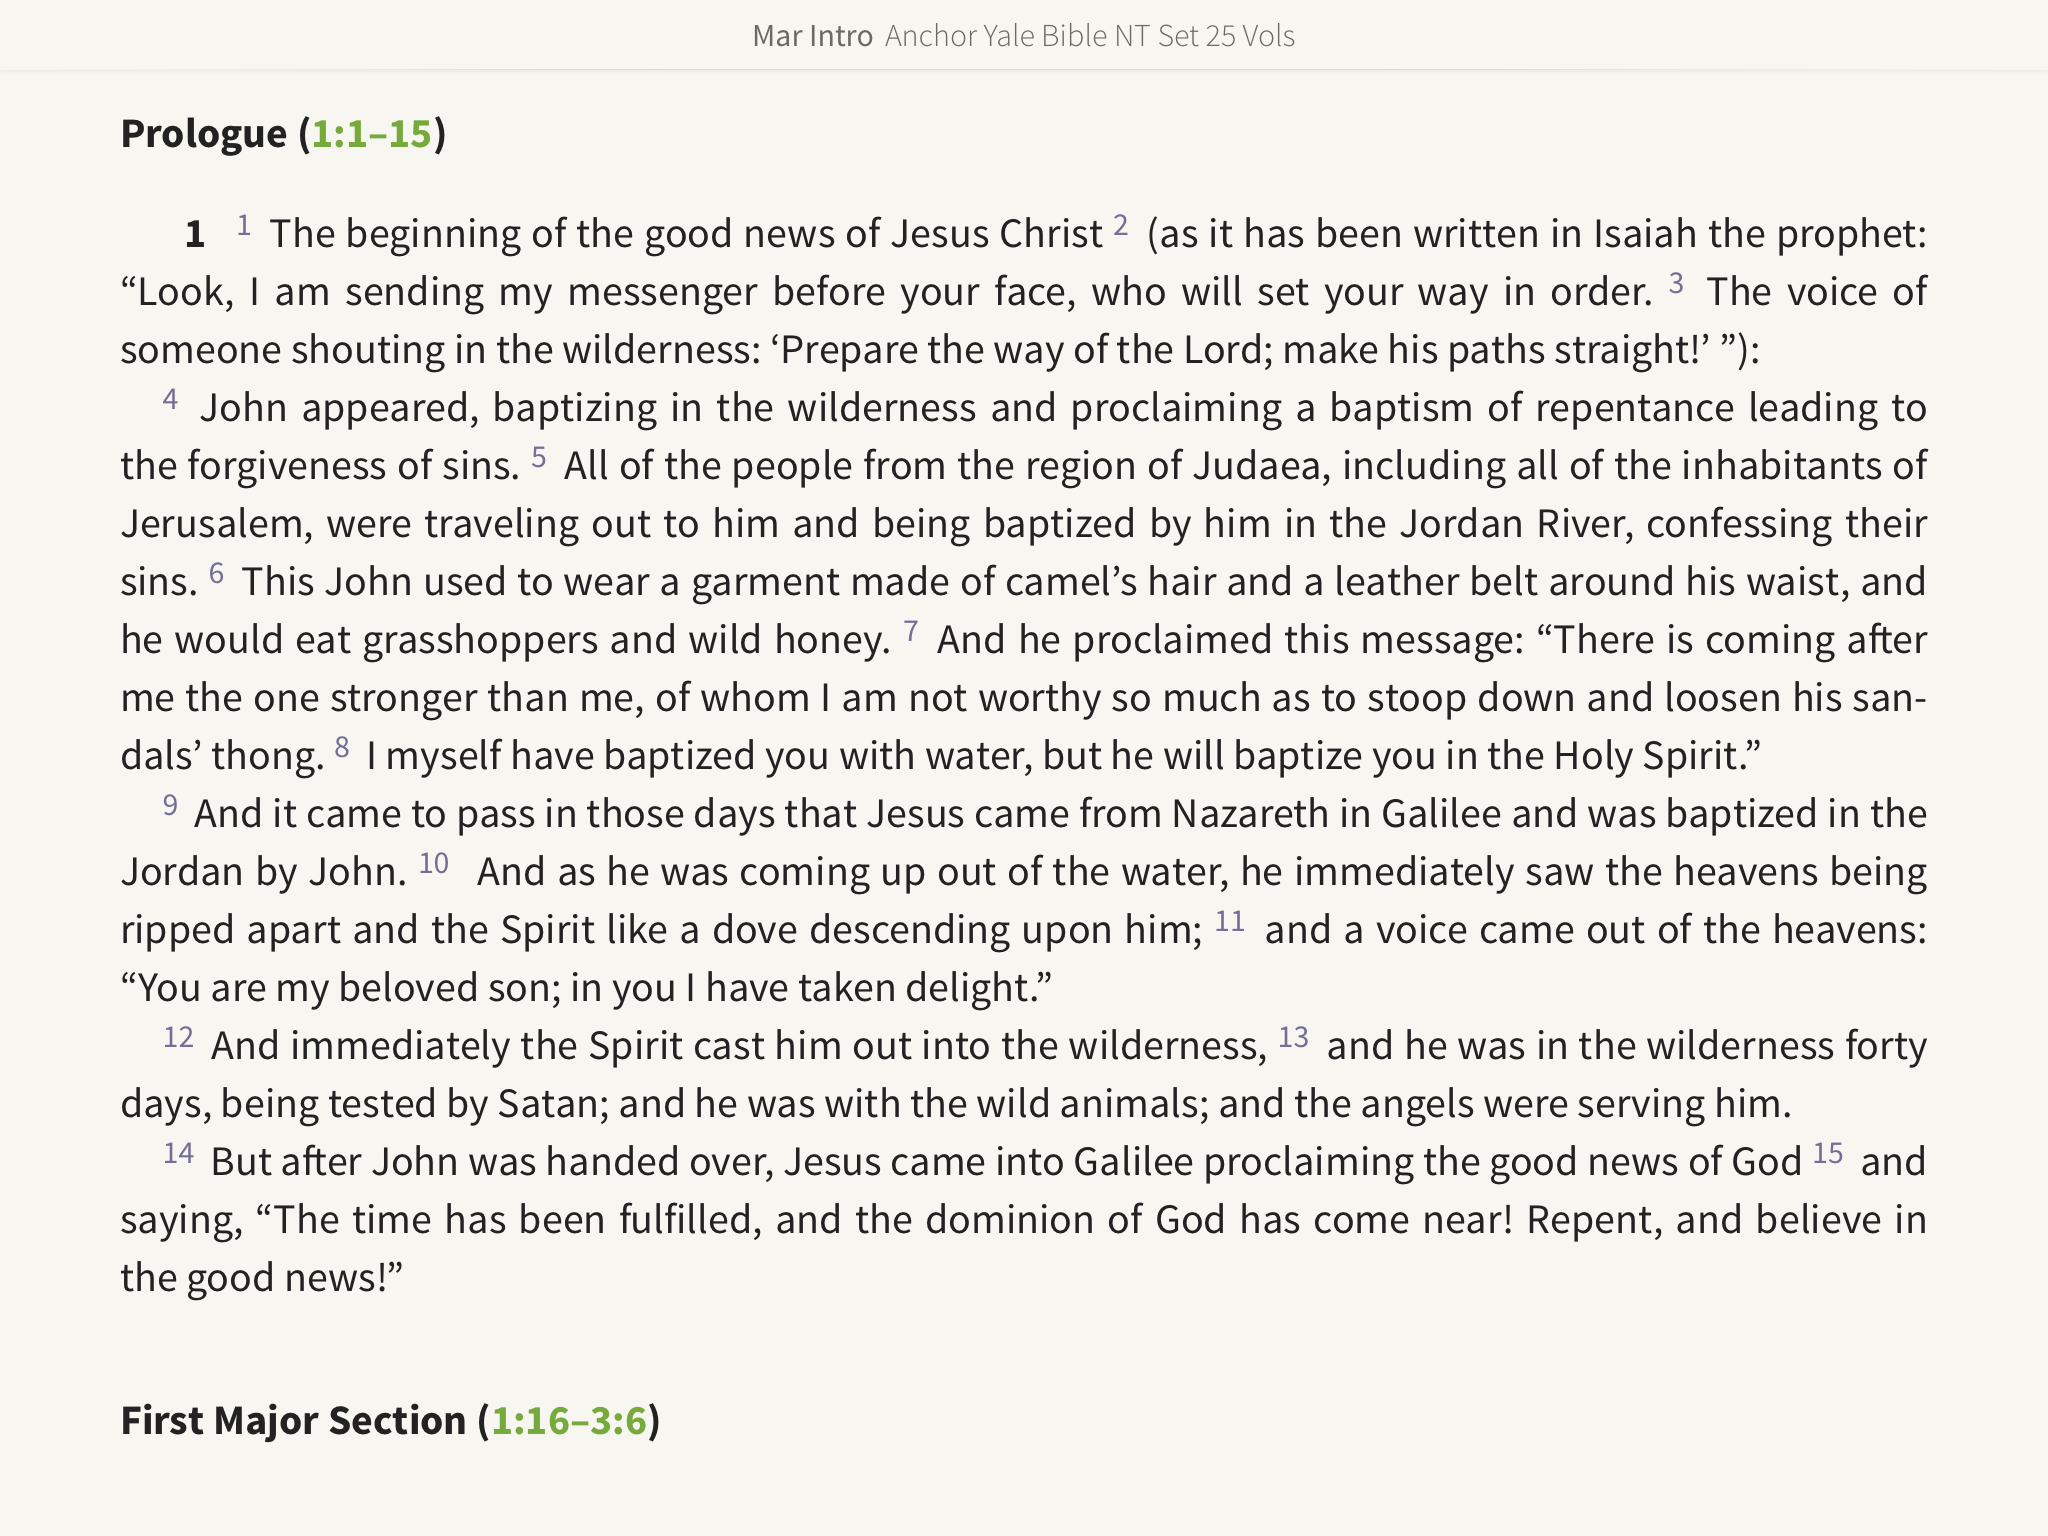 Anchor Yale bible commentary translation